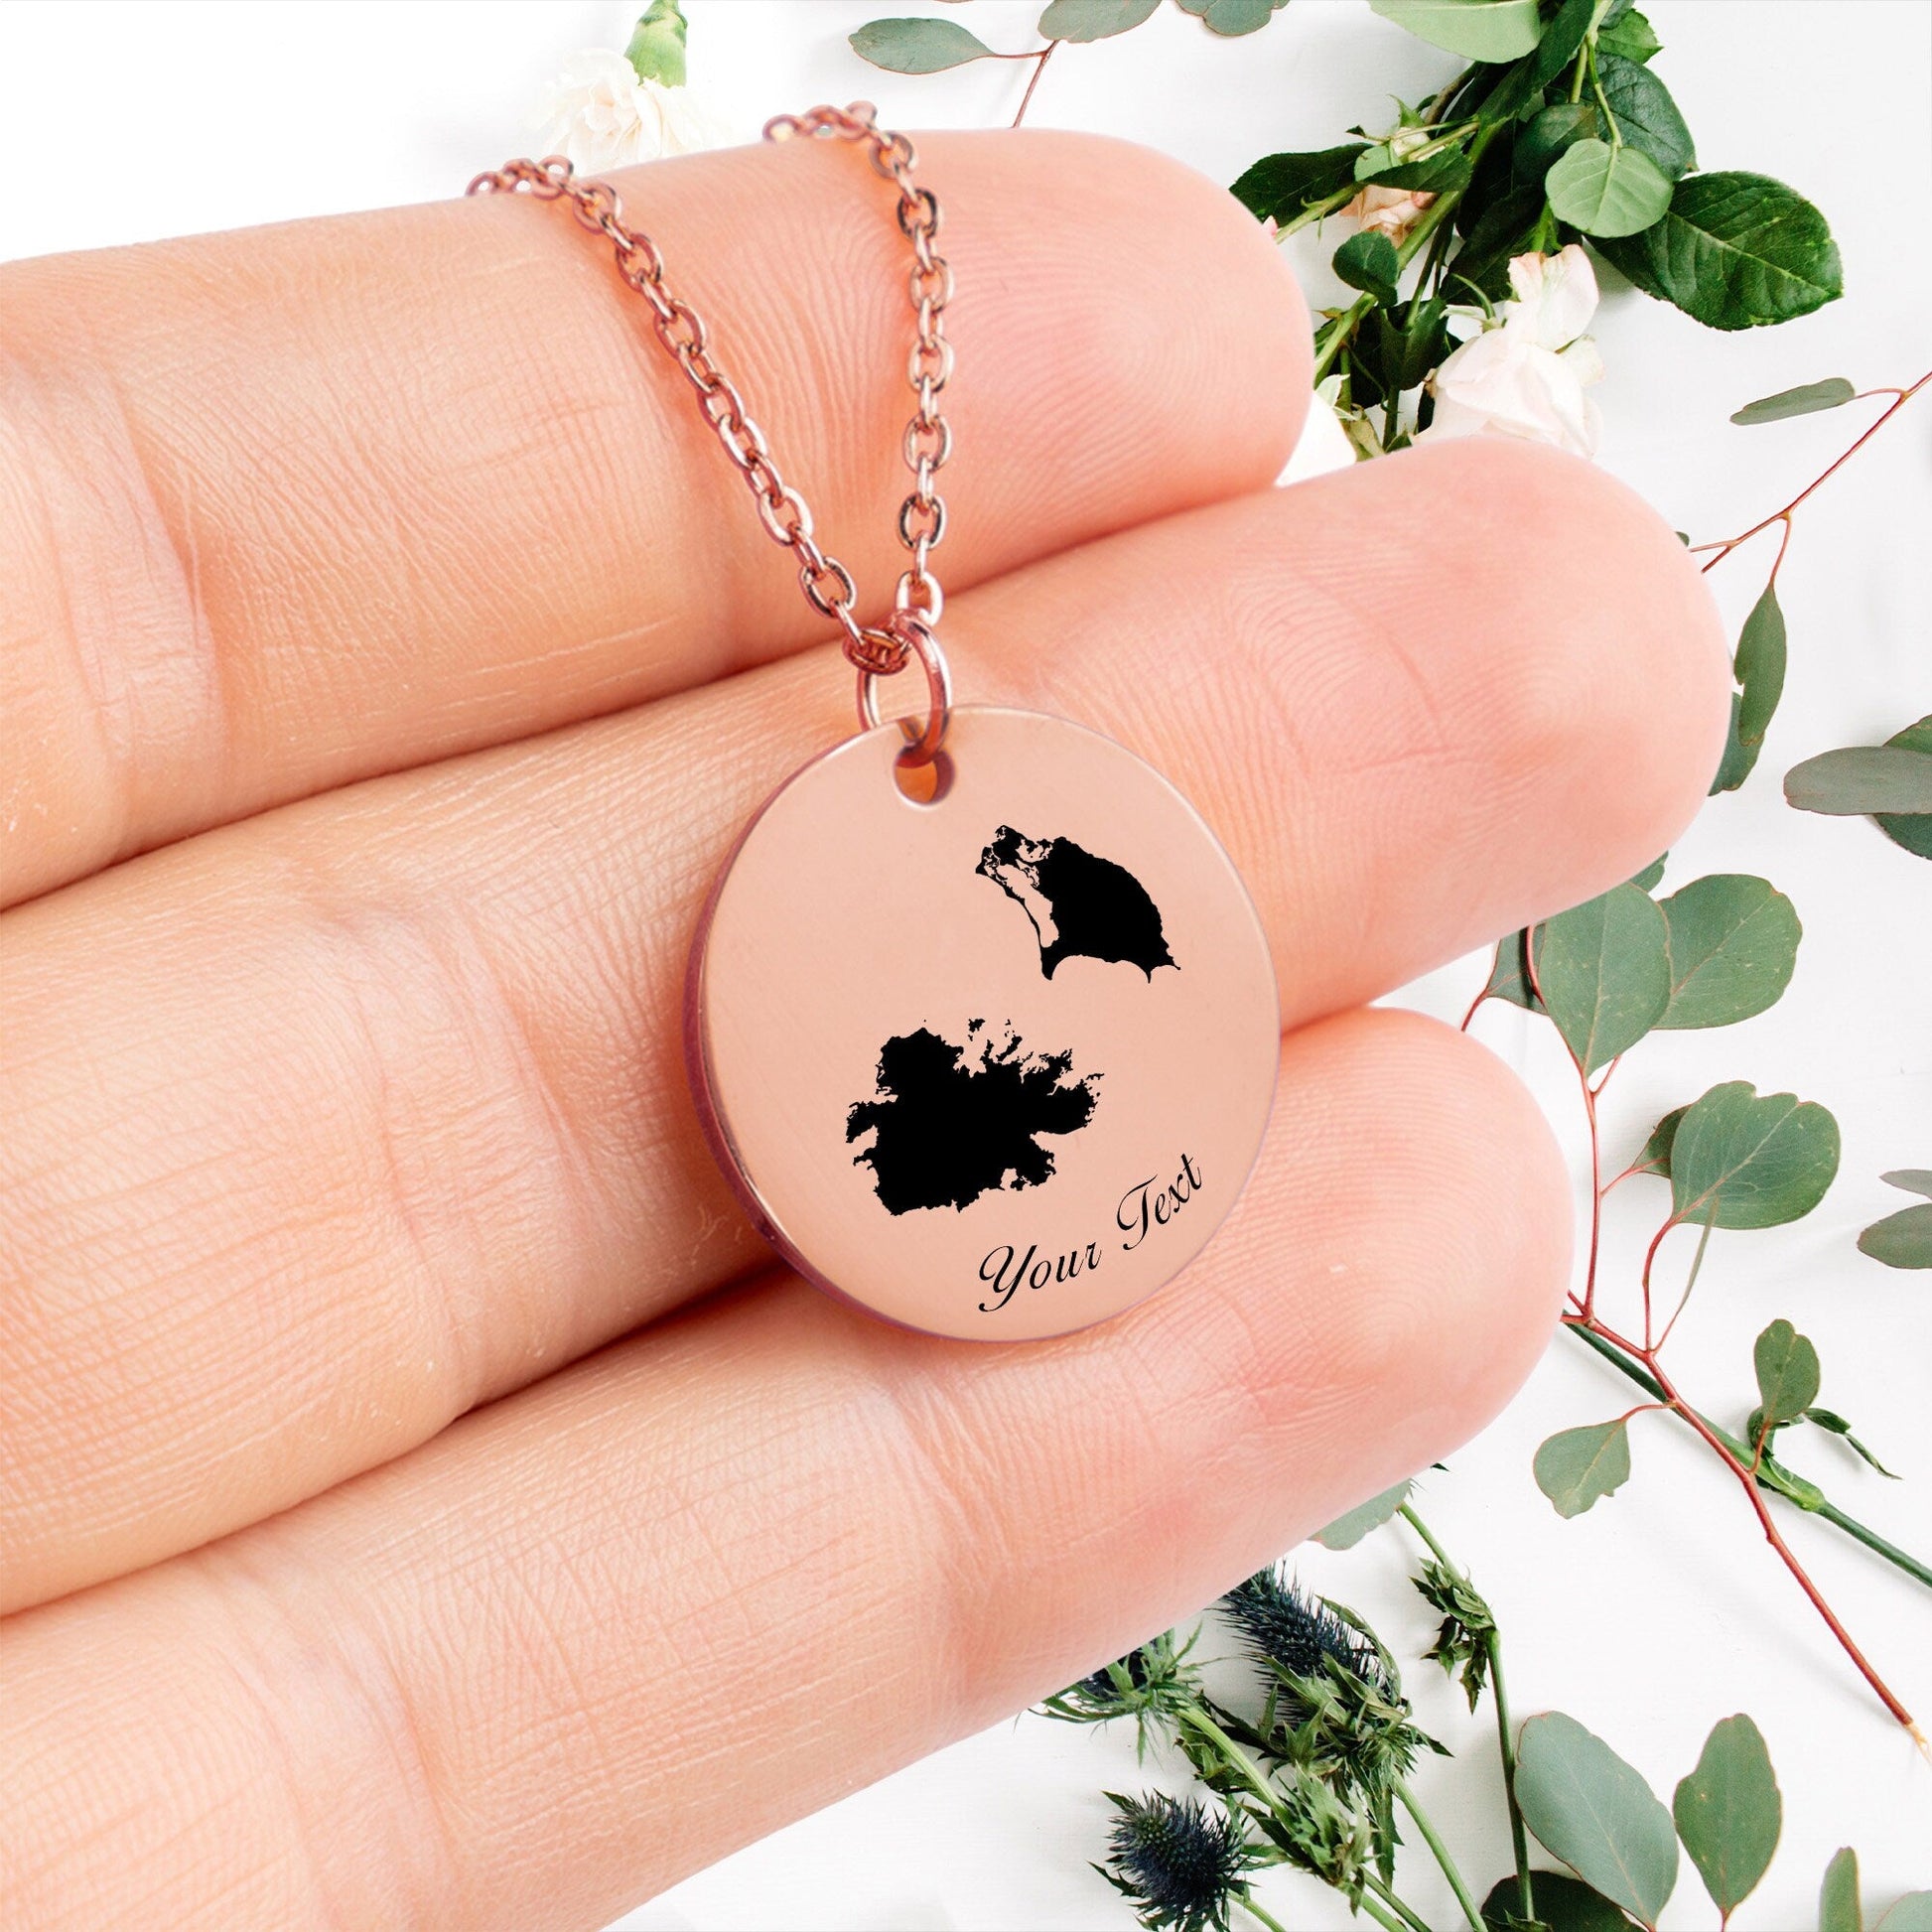 Antigua and Barbuda Country Map Necklace, Your Name Necklace, Minimalist Necklace, Personalized Gift, Silver Necklace, Gift For Him Her